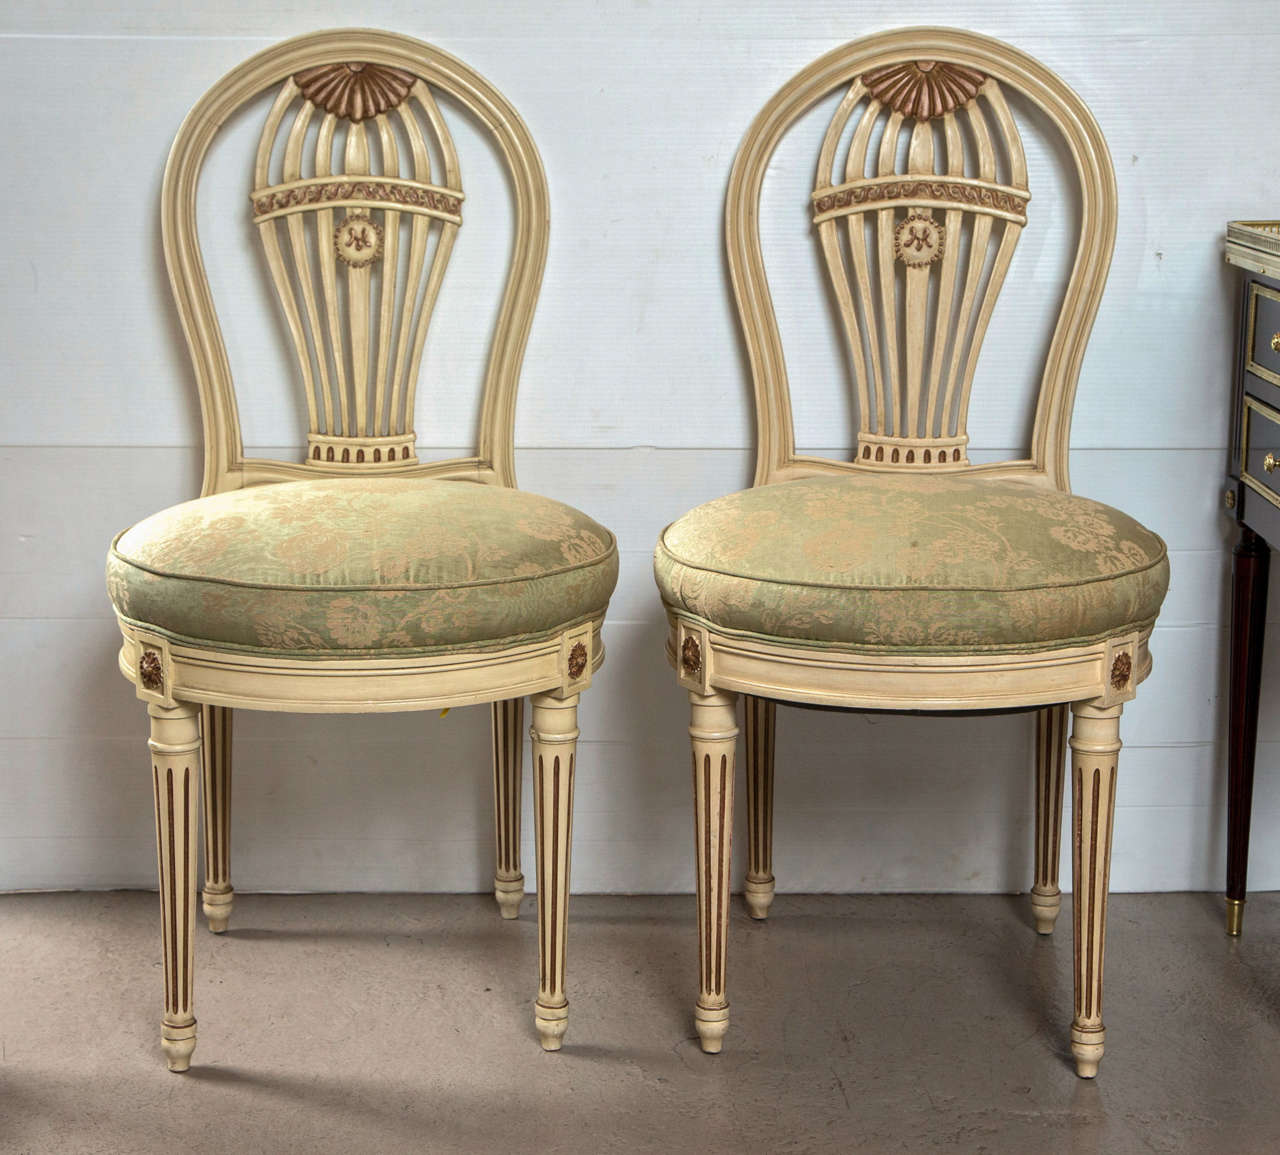 A fine set of ten dining chairs by Maison Jansen. Each having a gilt gold and off white paint decorated finish. The Louis XVI Style legs leading to a circular apron with gilt corner decorations and covered in a recent fabric. The back splats having